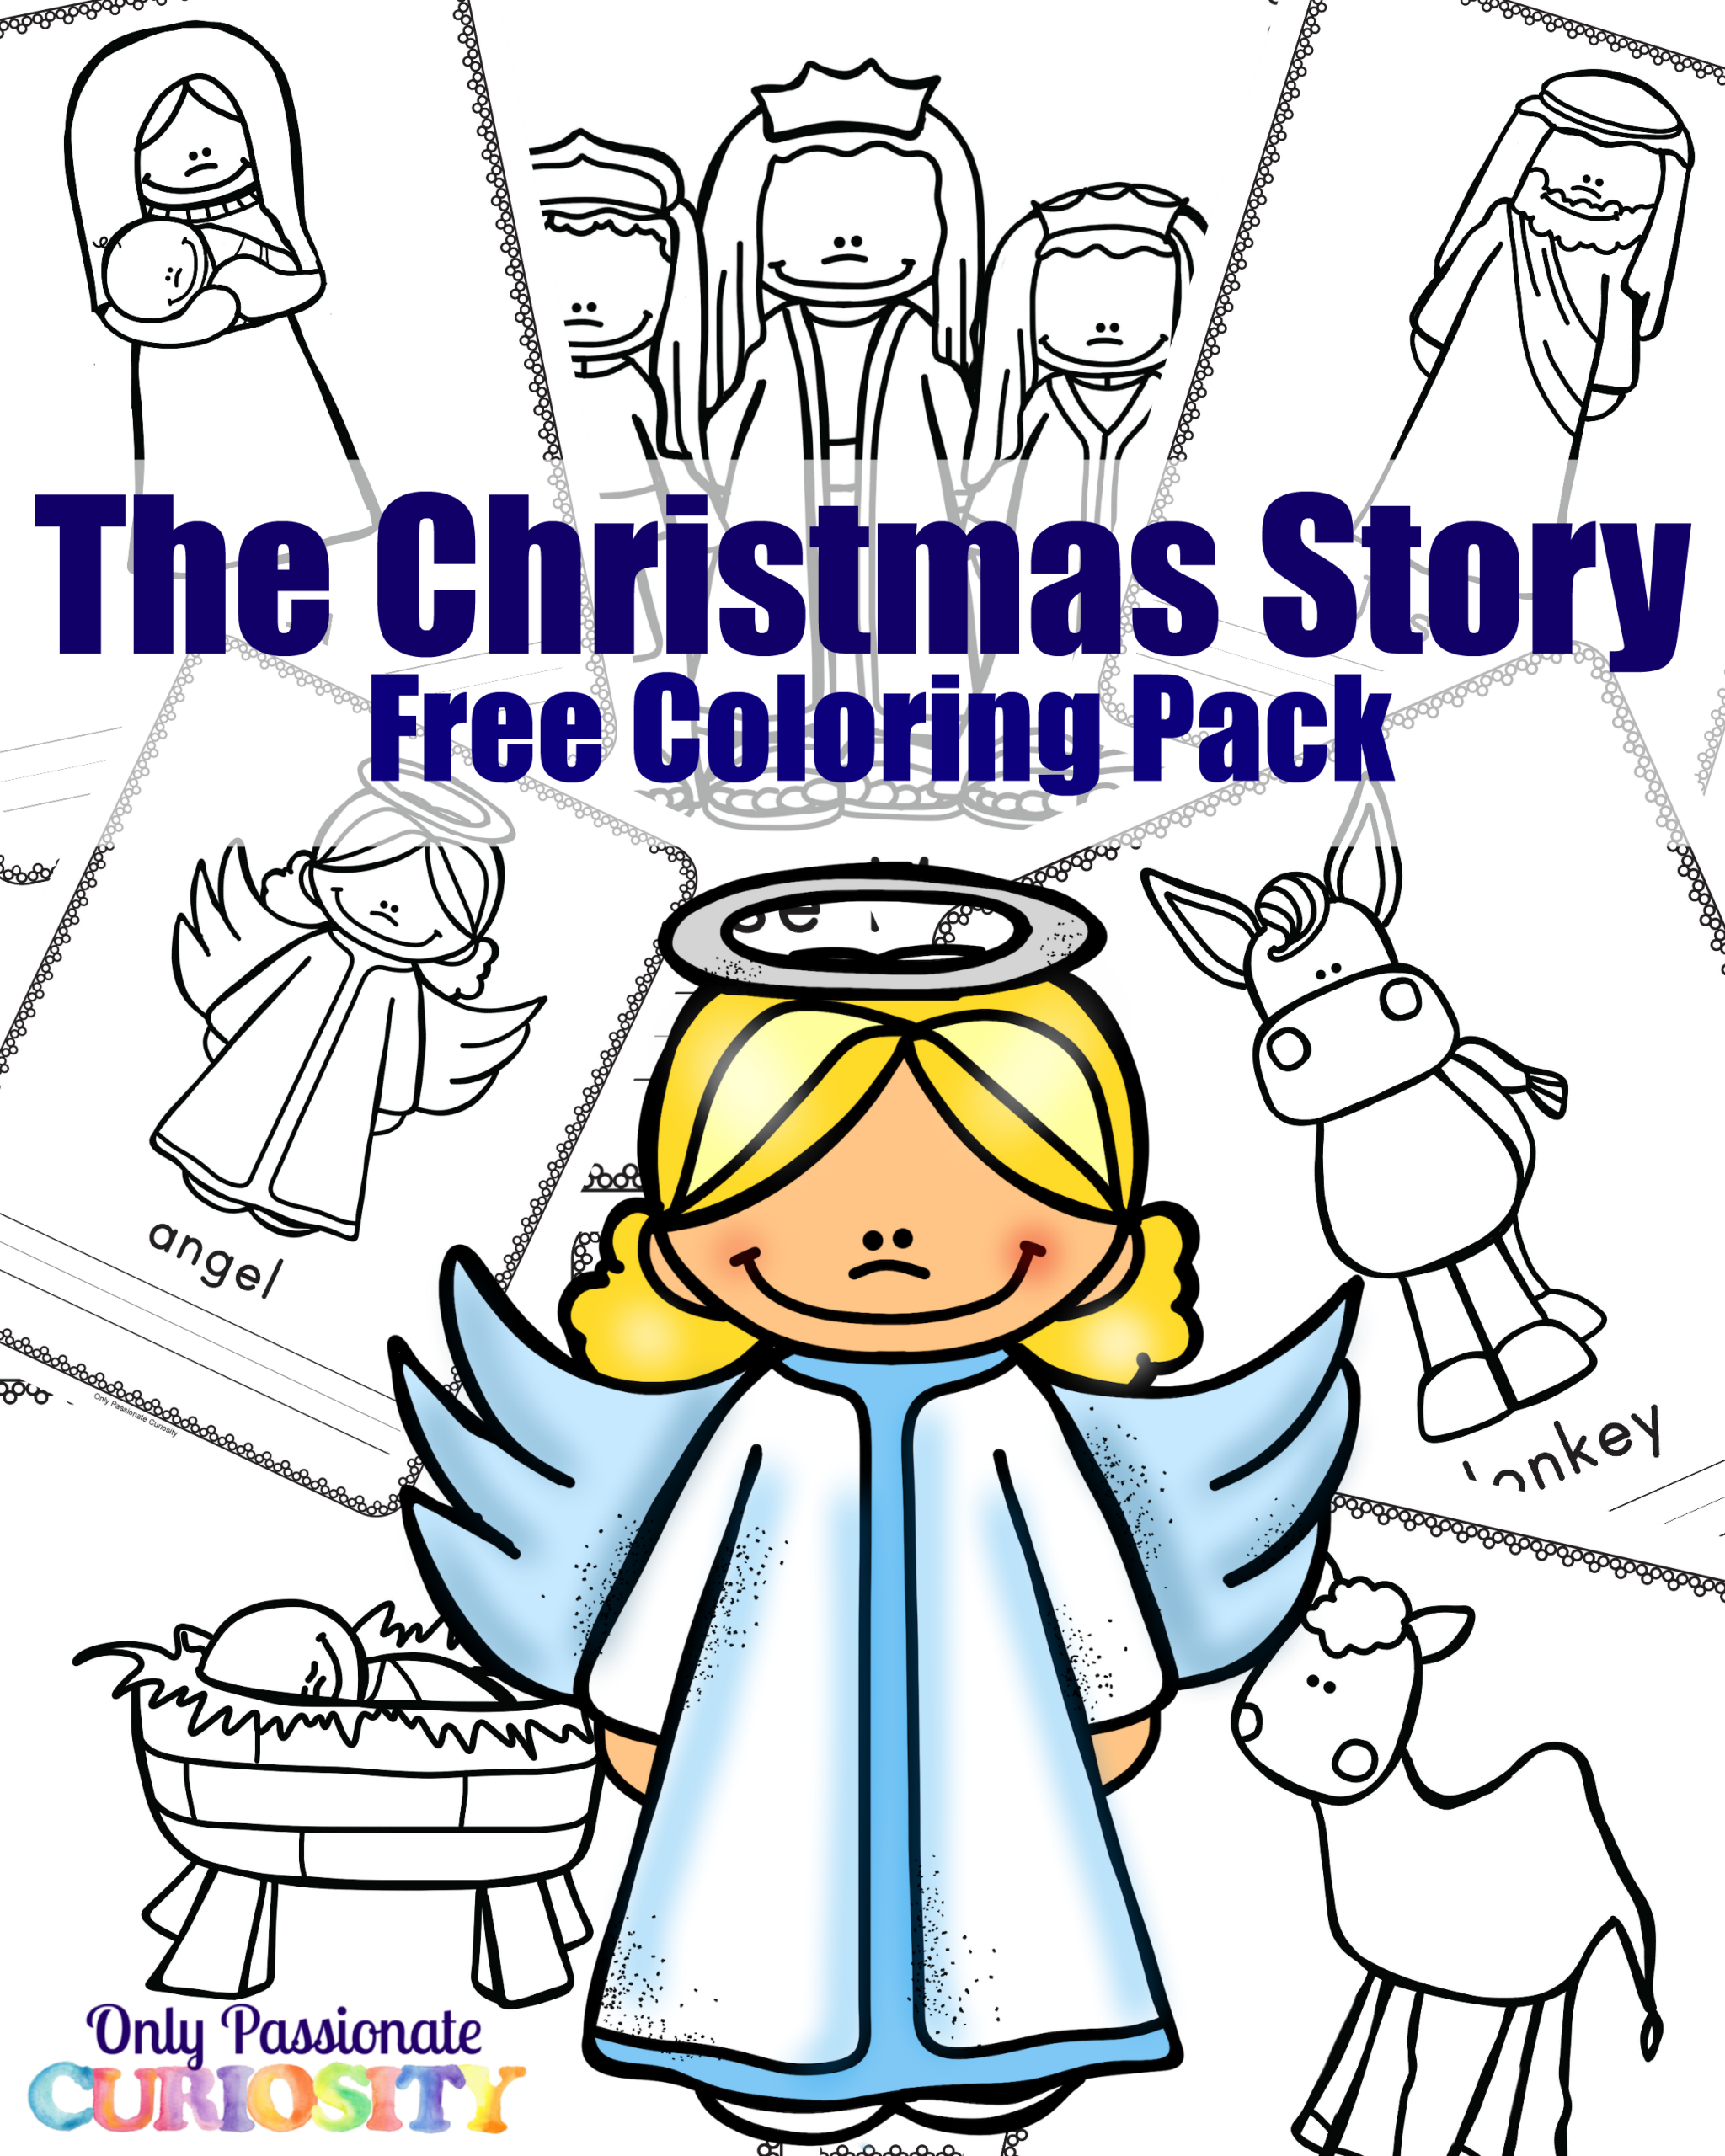 Christmas story coloring pack